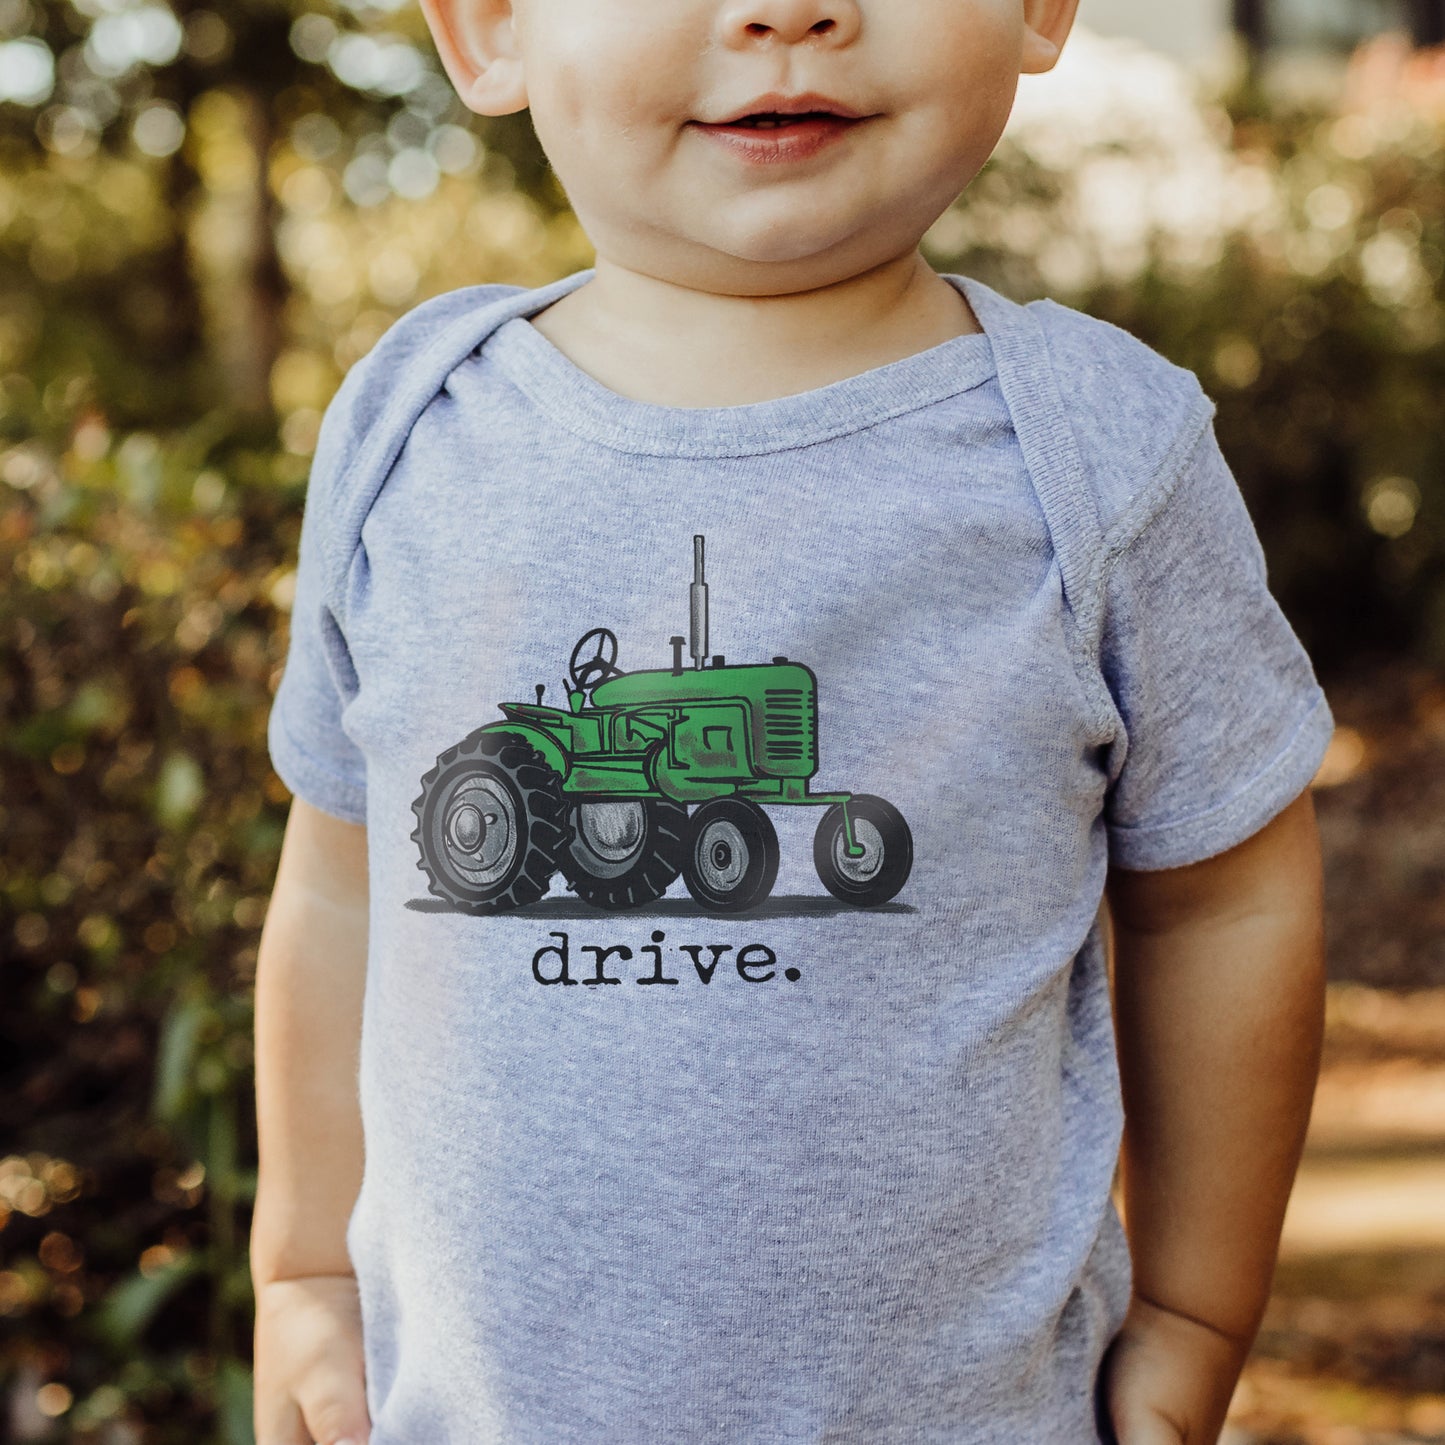 "Drive" Green tractor Grey Body suit